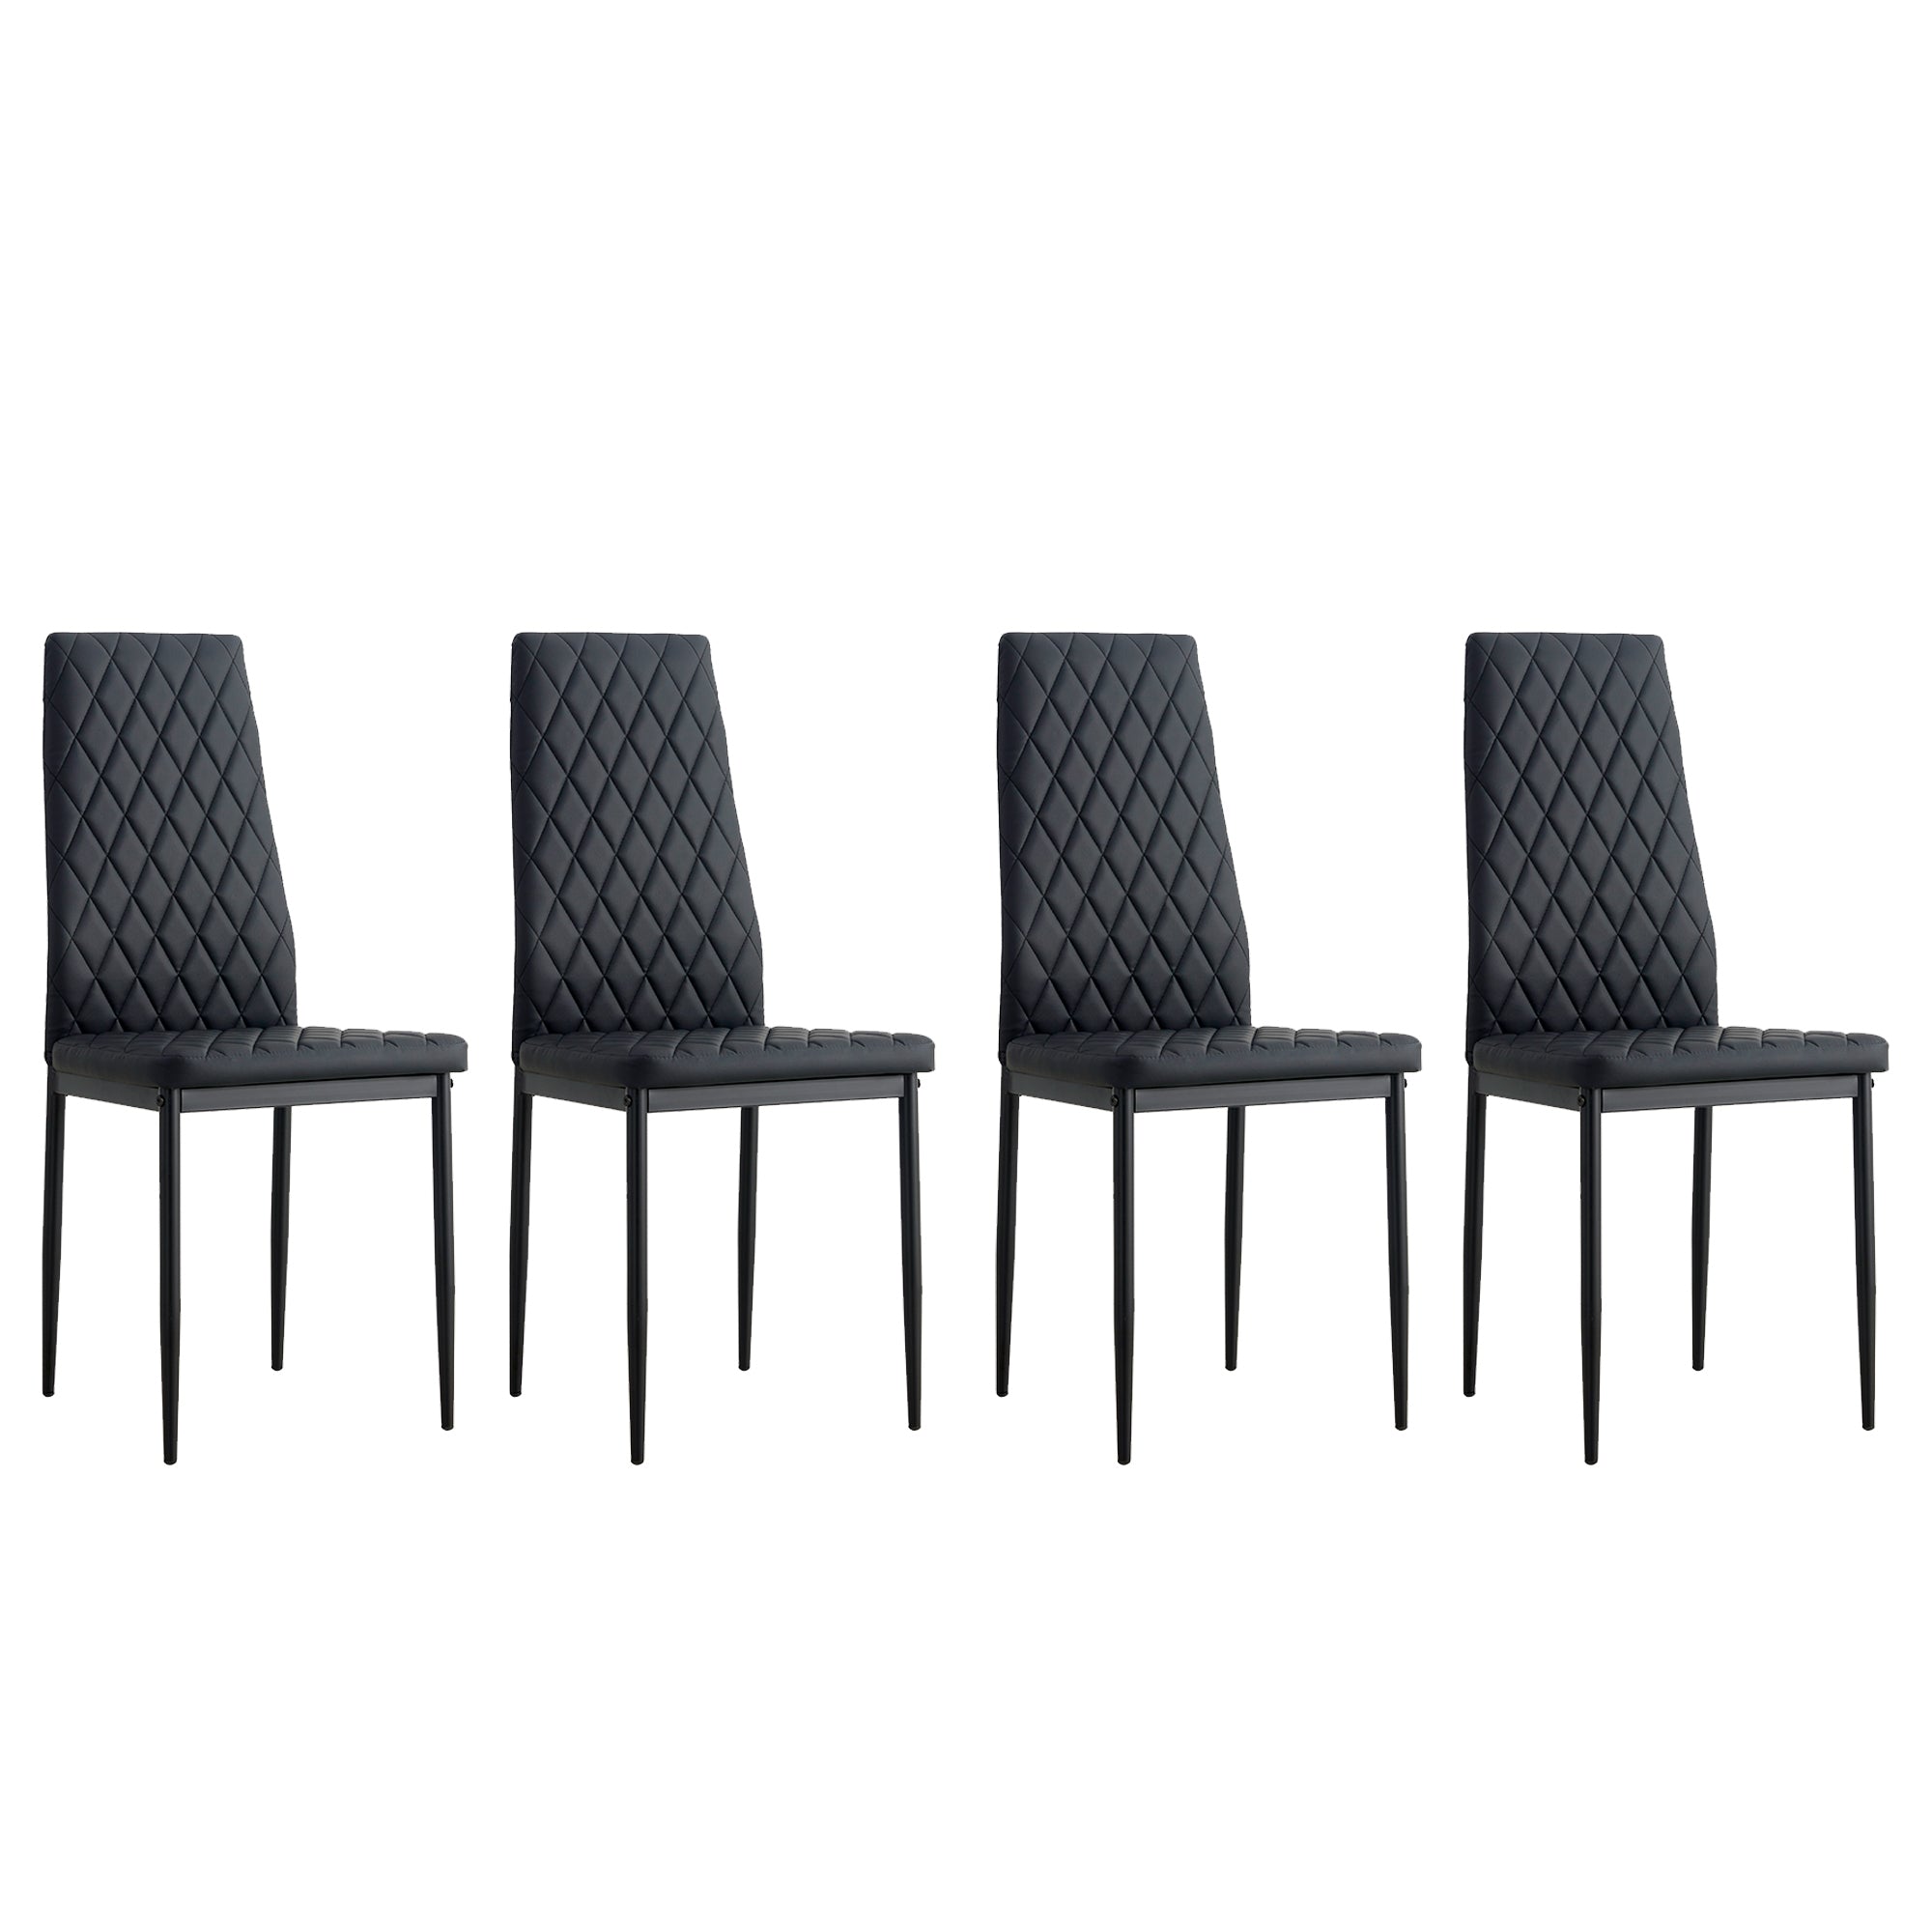 Luca 5 Pieces Dining Set, Black Tempered Glass Top, 4 Tufted black Faux Leather Chairs